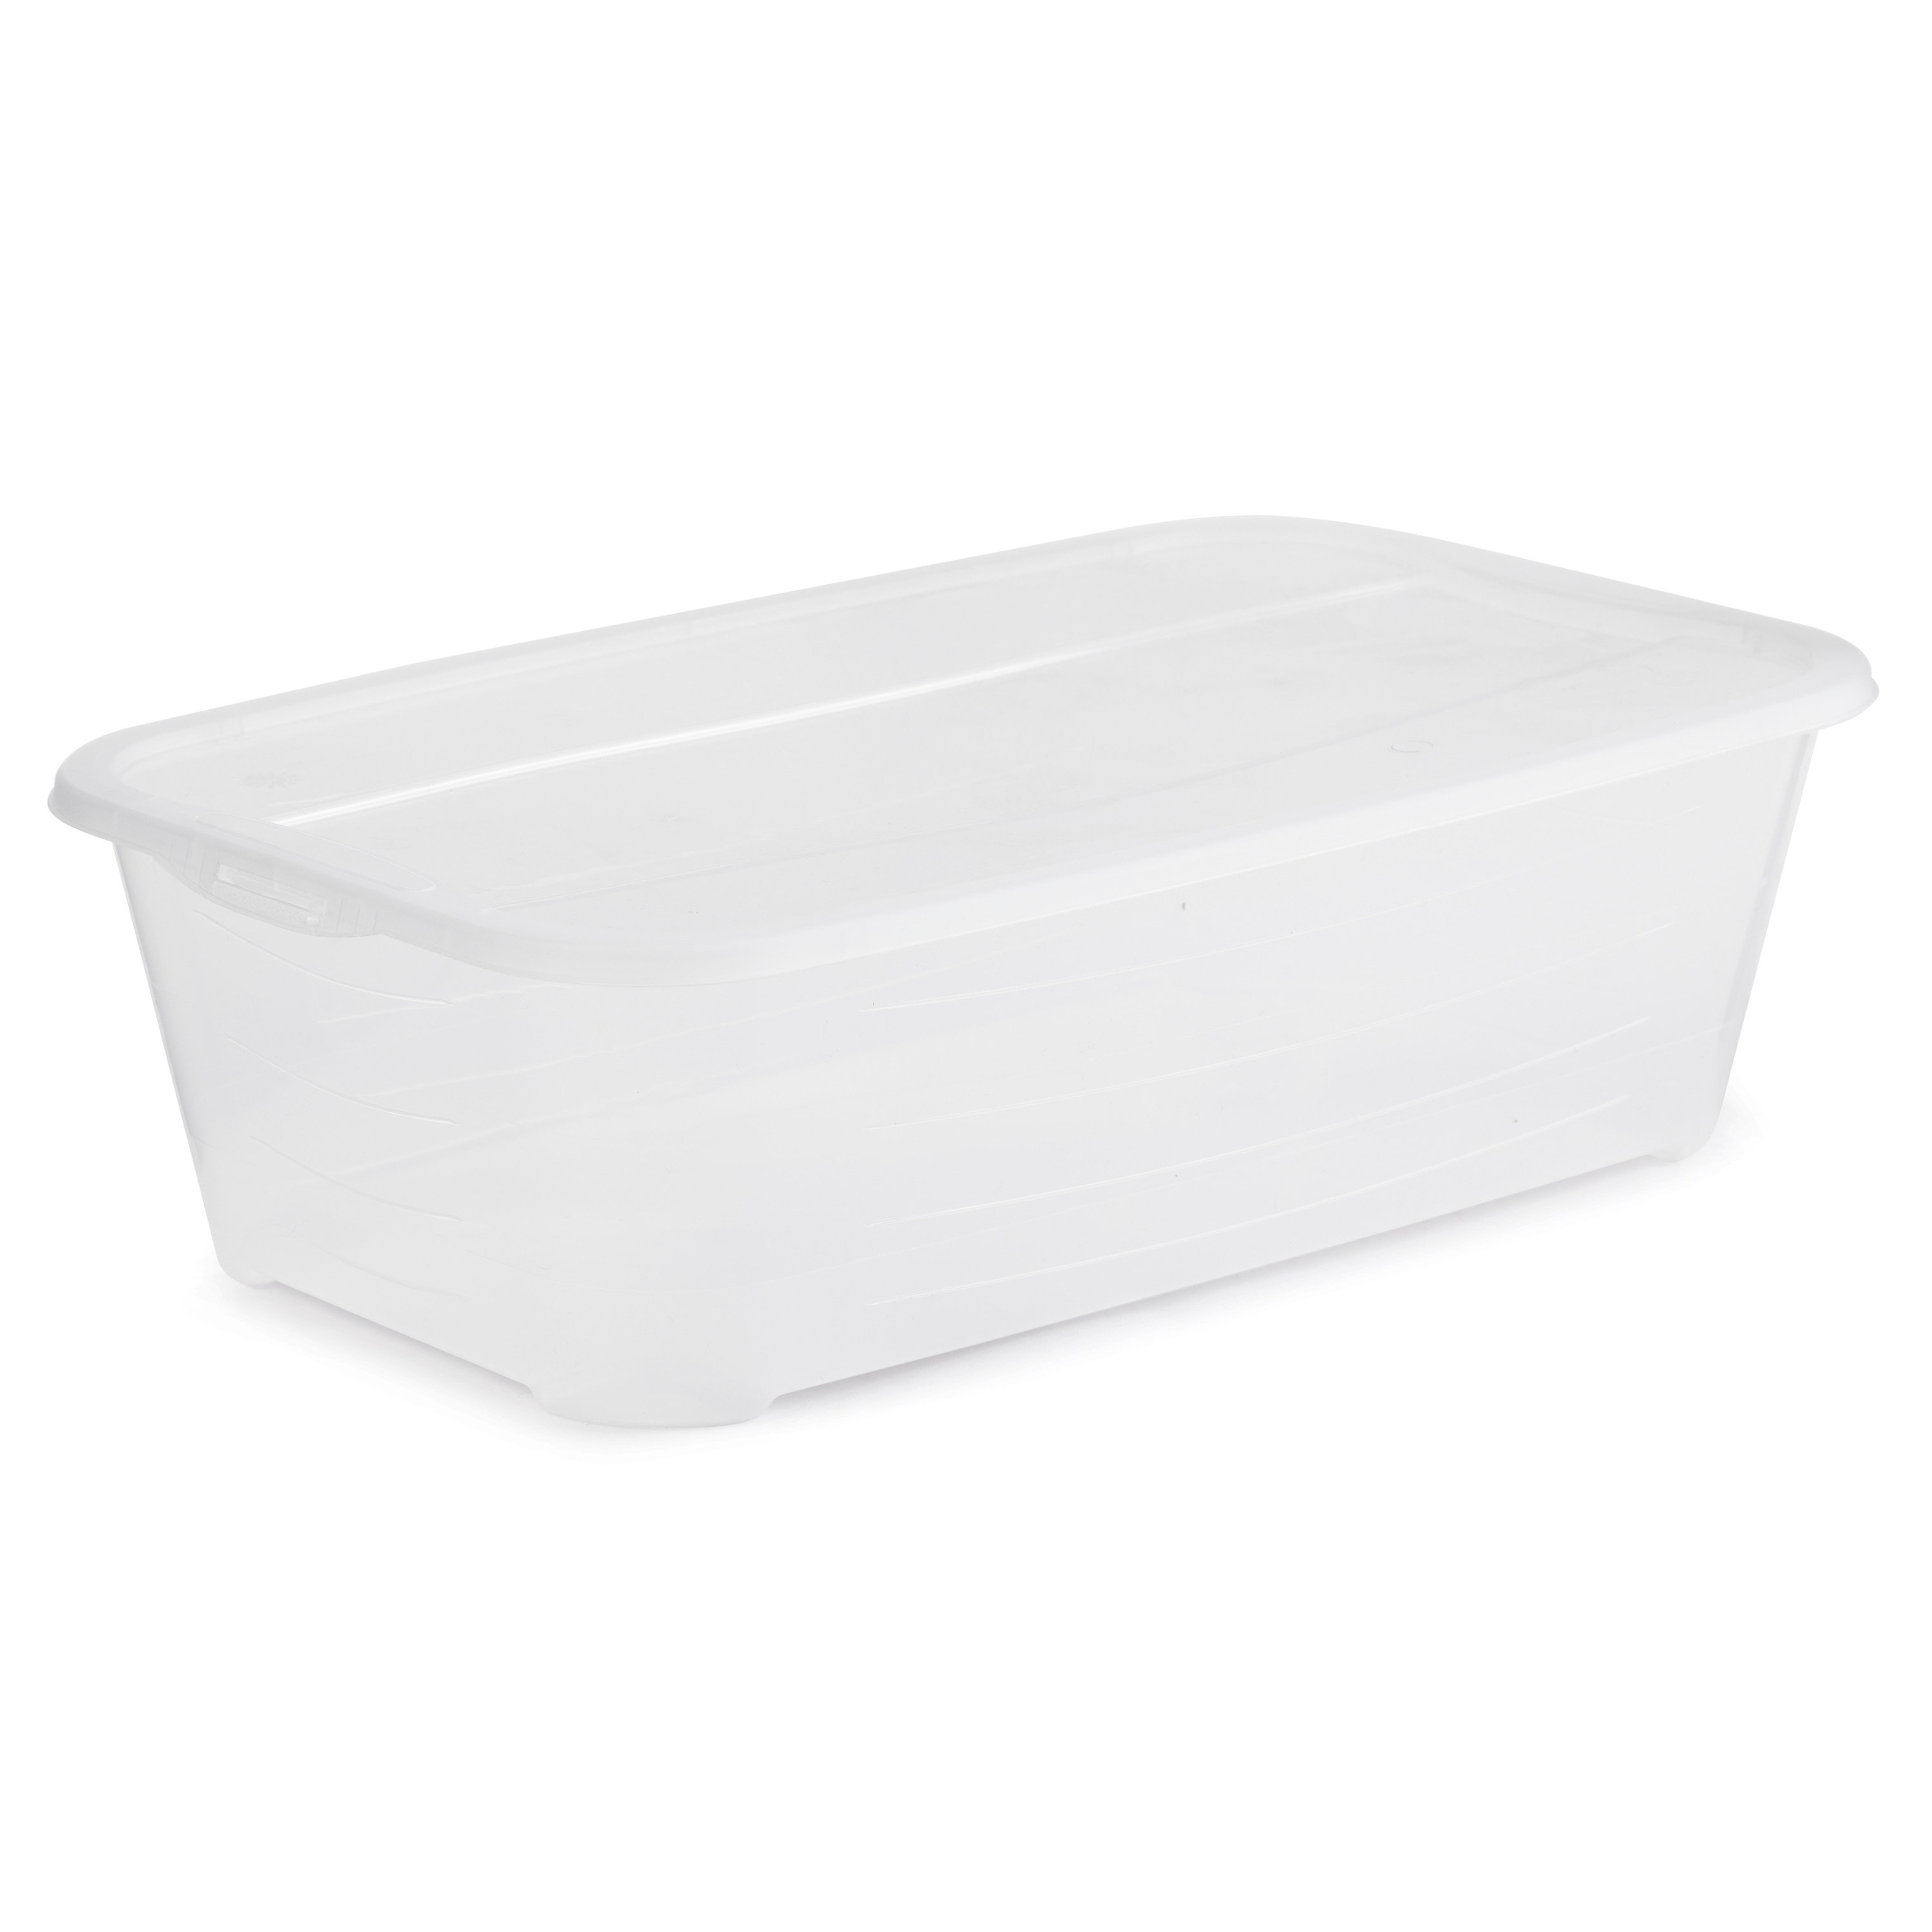 Life Story 5.7 Liter Clear Shoe/Closet Storage Box Stacking